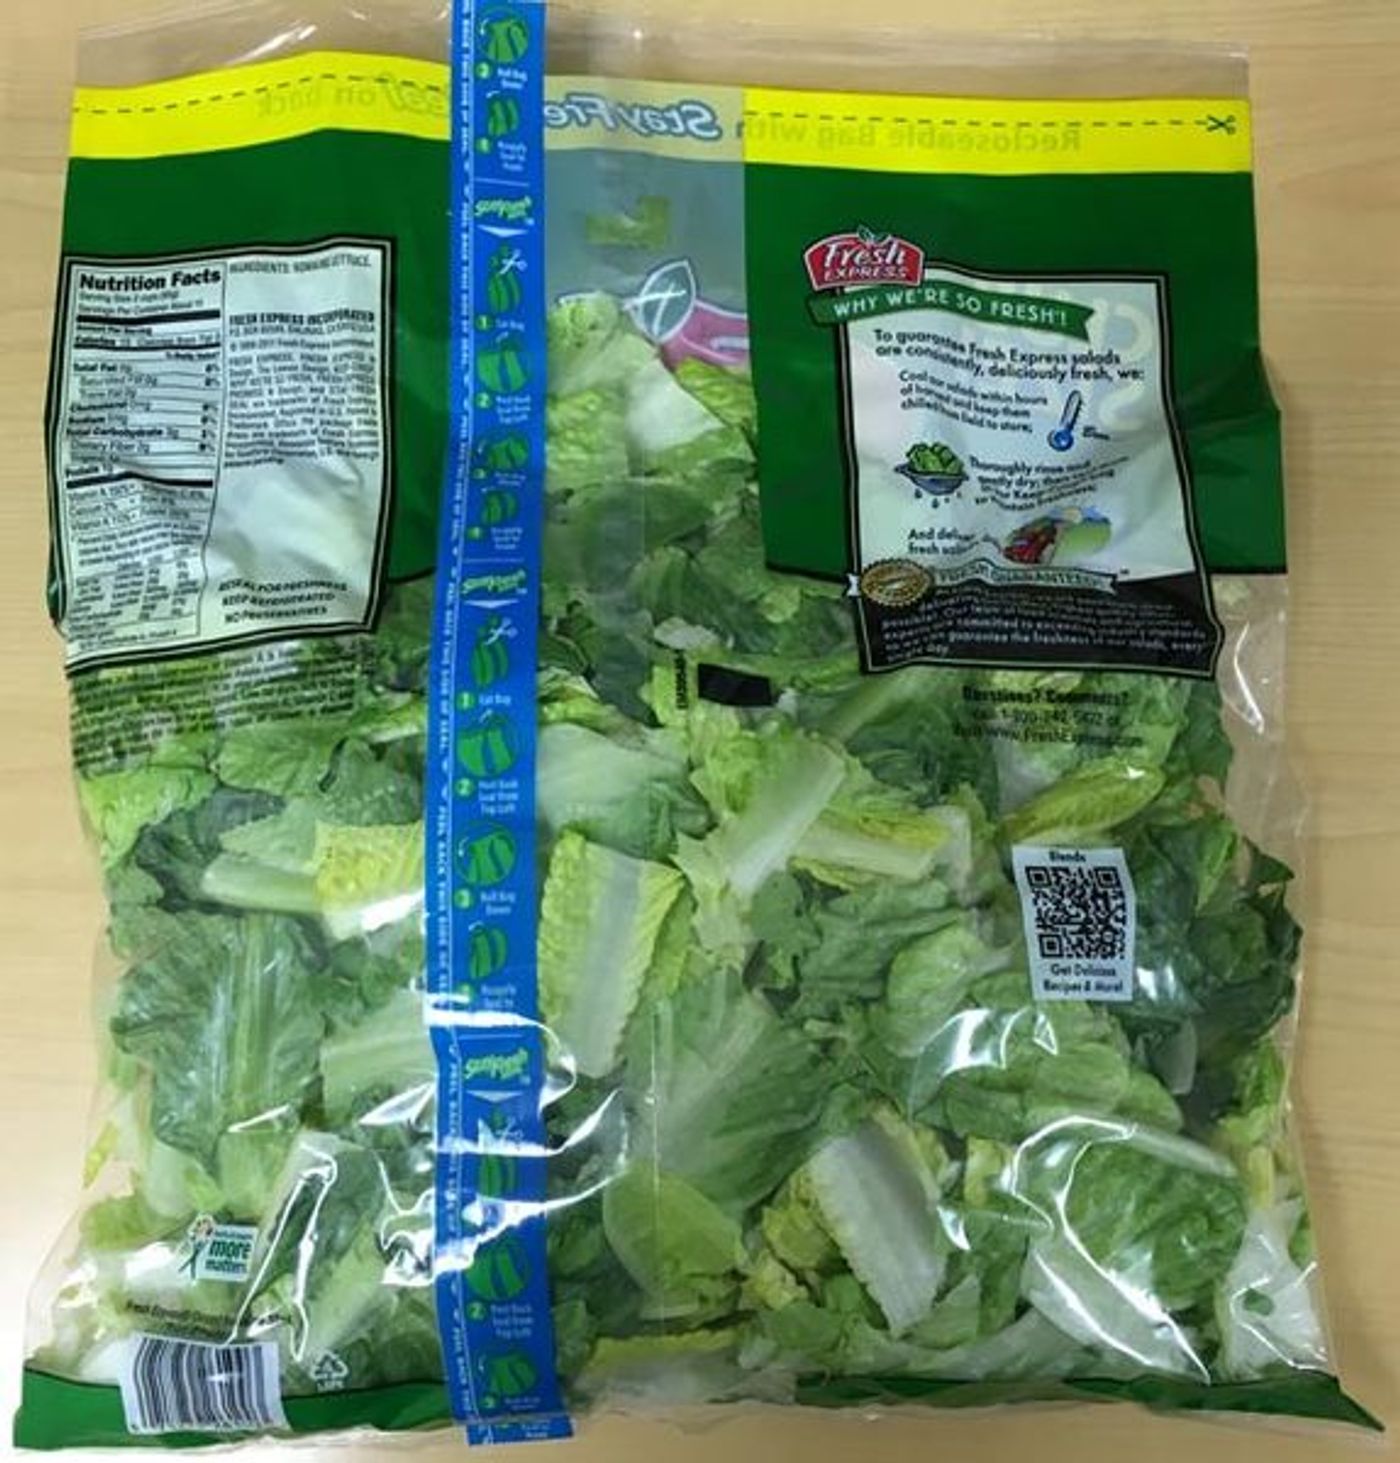 Chopped romaine lettuce from an as yet unidentified source has caused (yet another) illness outbreak. / Image credit: FDA